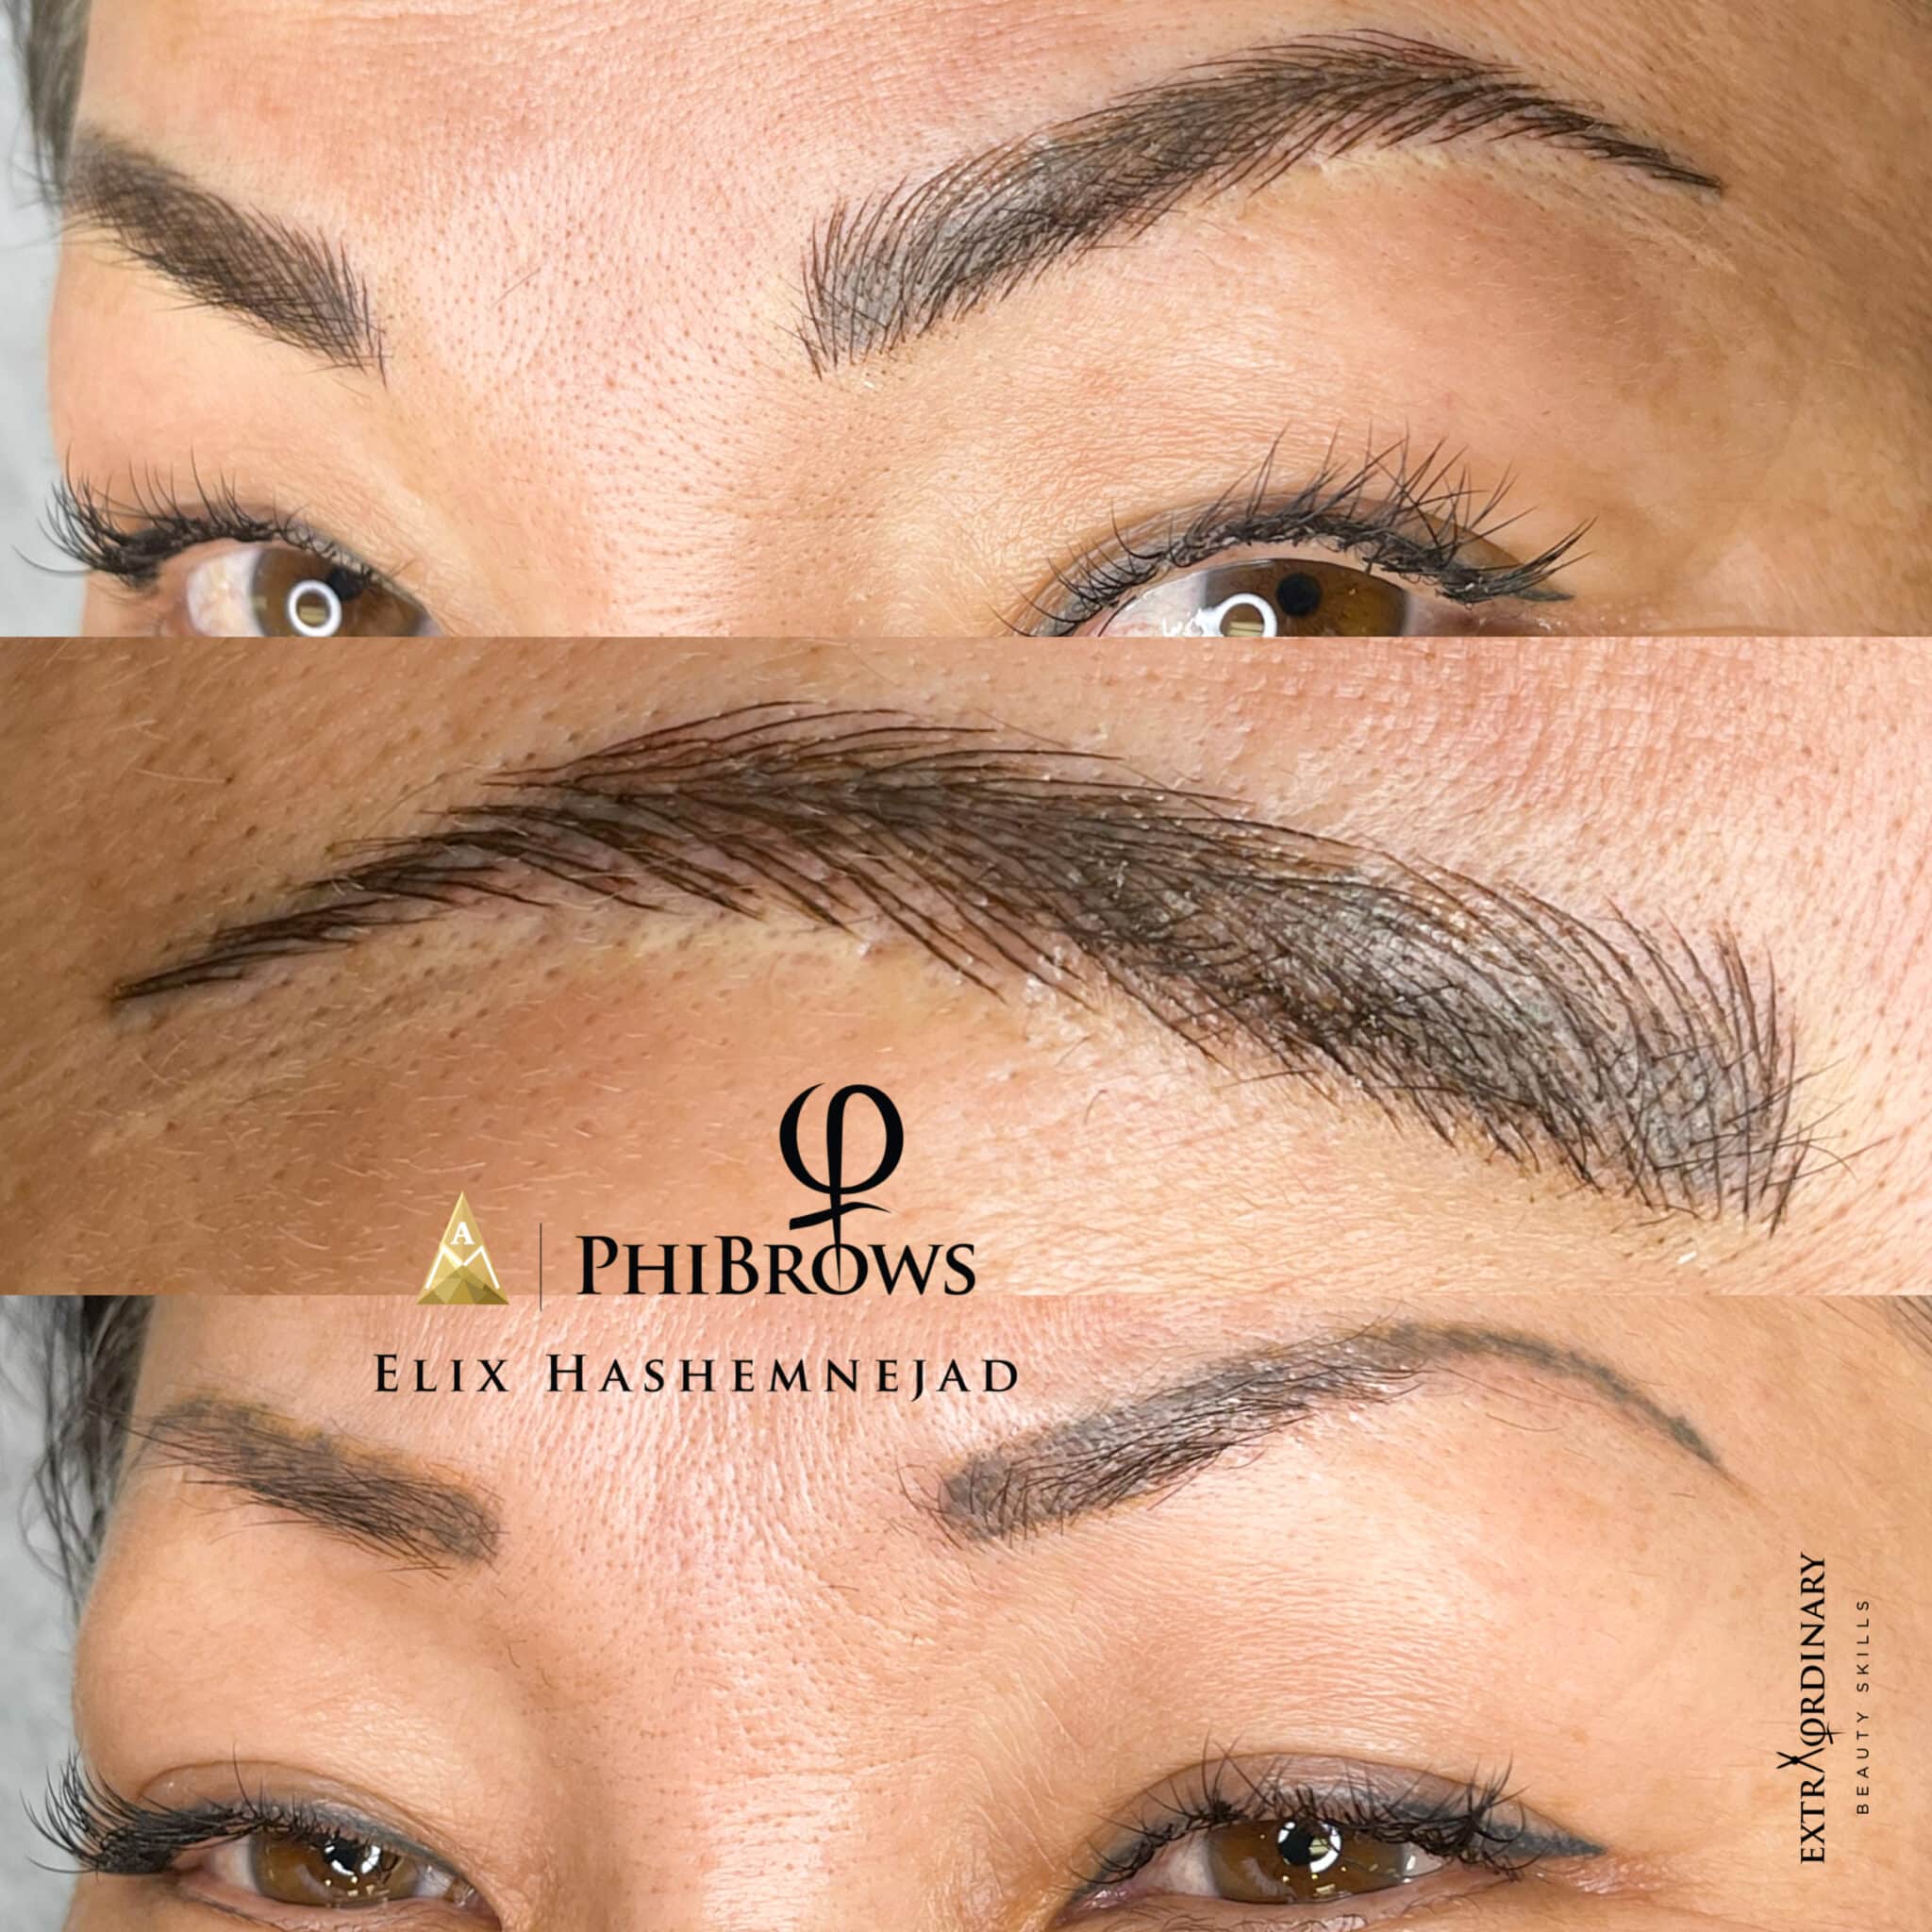 IMG 7628 scaled - Phibrows - Eyebrows Microblading